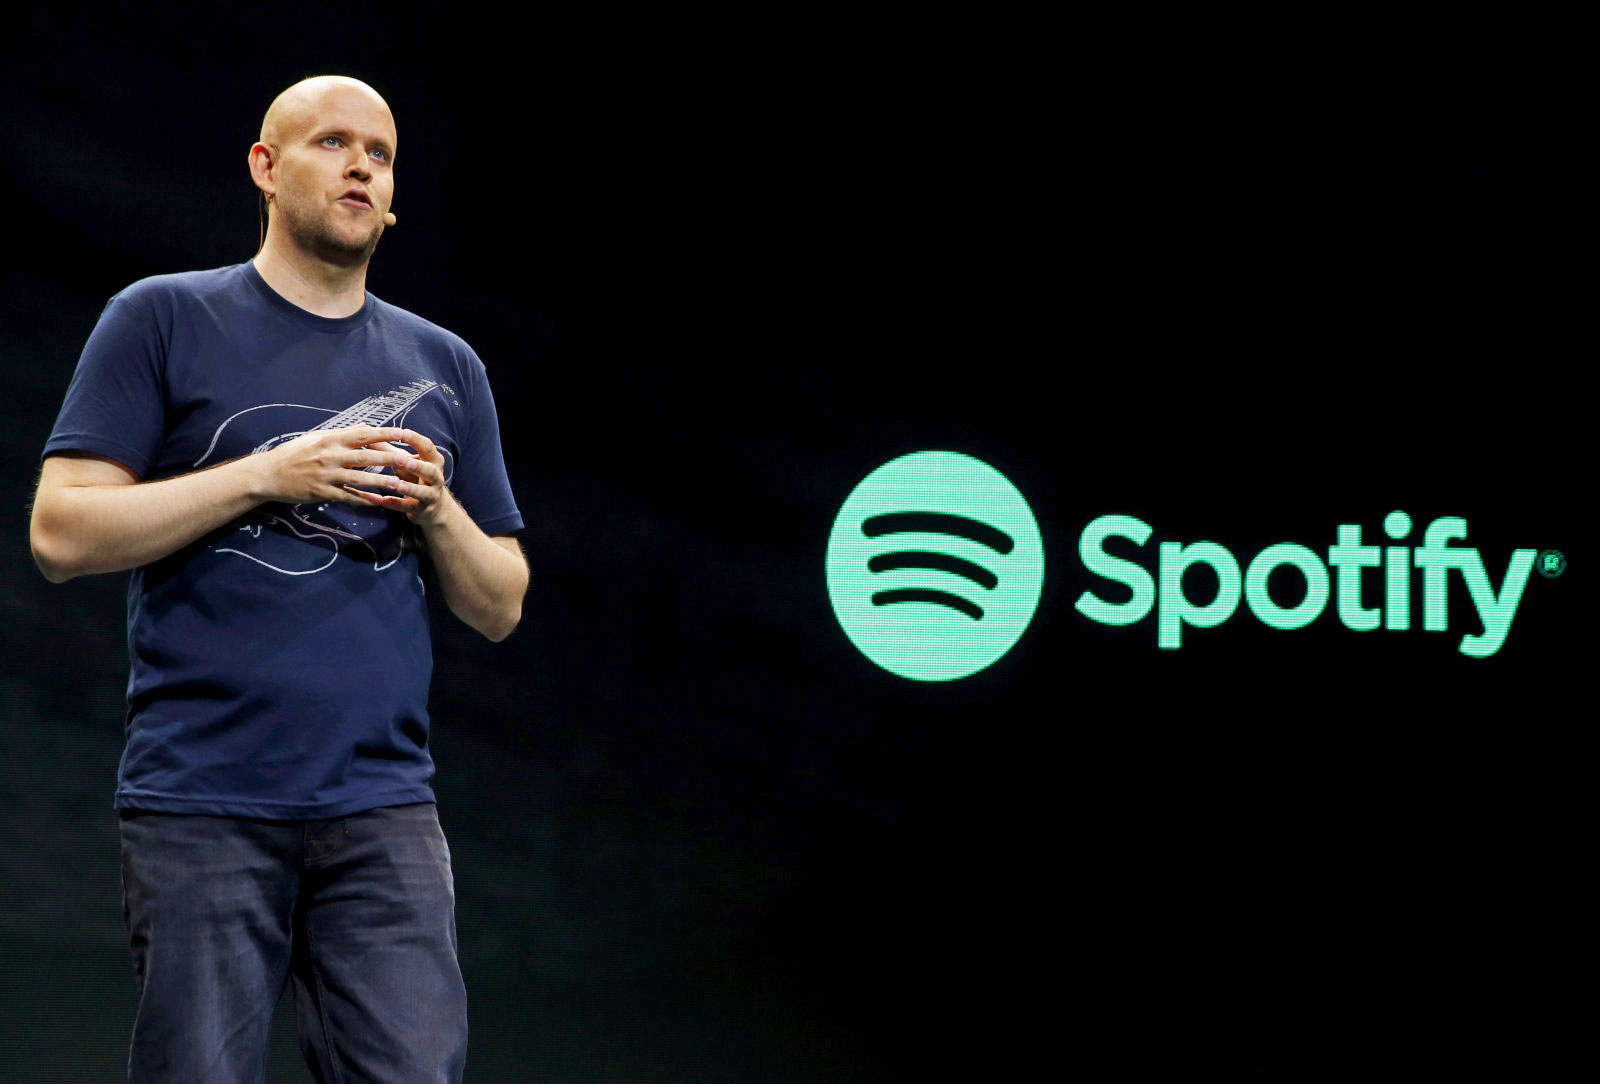 Spotify: Apple is holding up app approval to squash competition